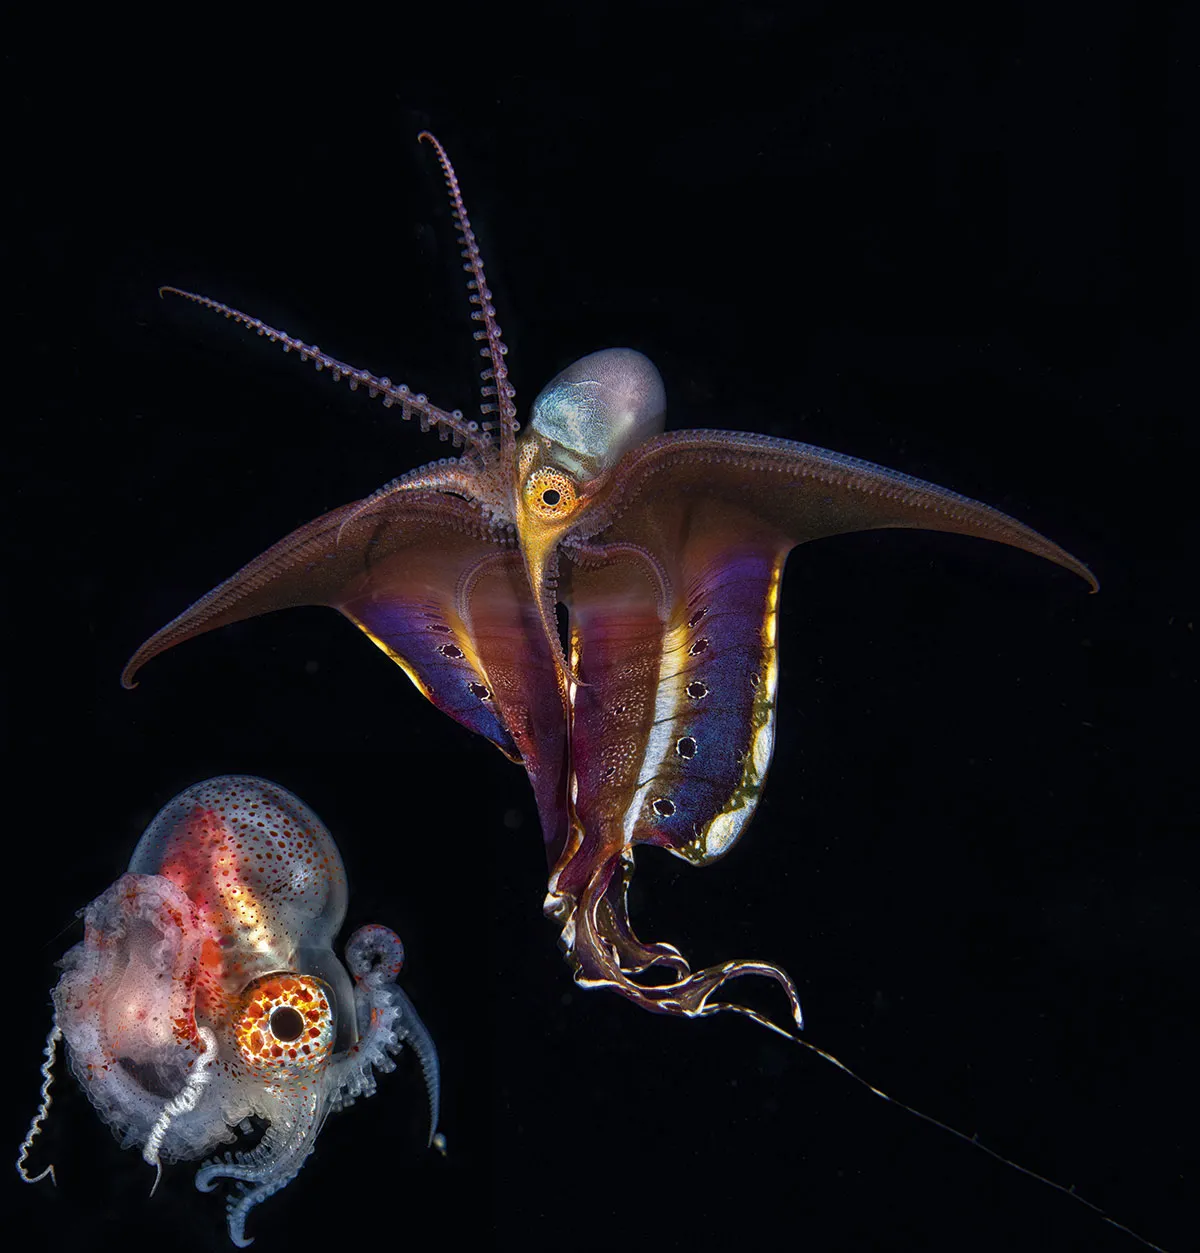 A female and male blanket octopus showing their 'peacock' eyes © Magnus Lundgren/NaturePL.com